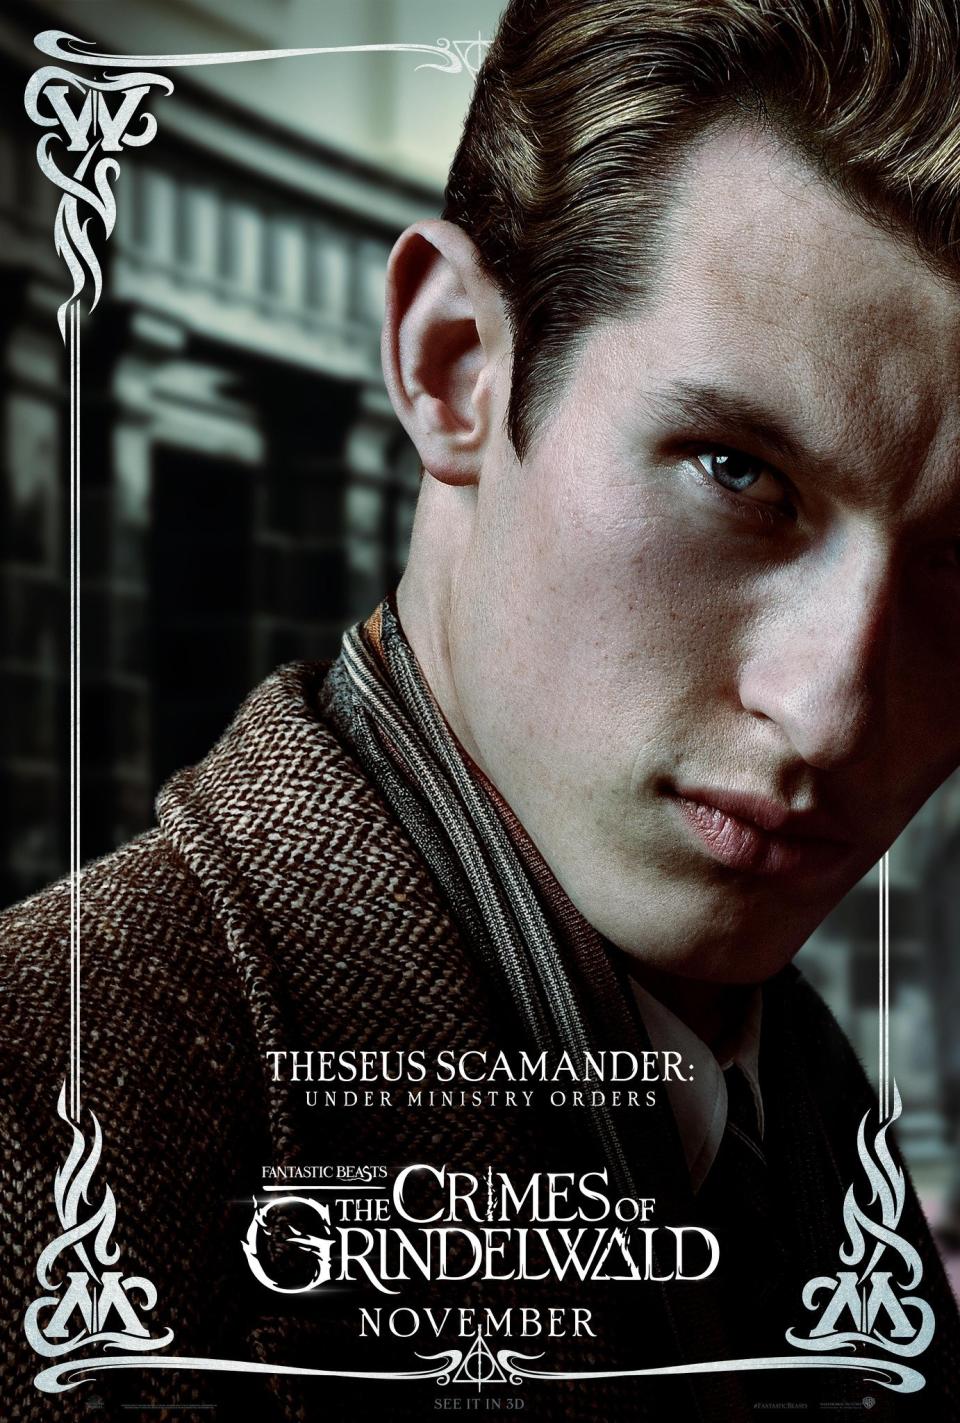 Callum Turner as Theseus Scamander on his &lt;i&gt;Fantastic Beasts and the Crimes of Grindelwald&lt;/i&gt; character poster. (Warner Bros.)